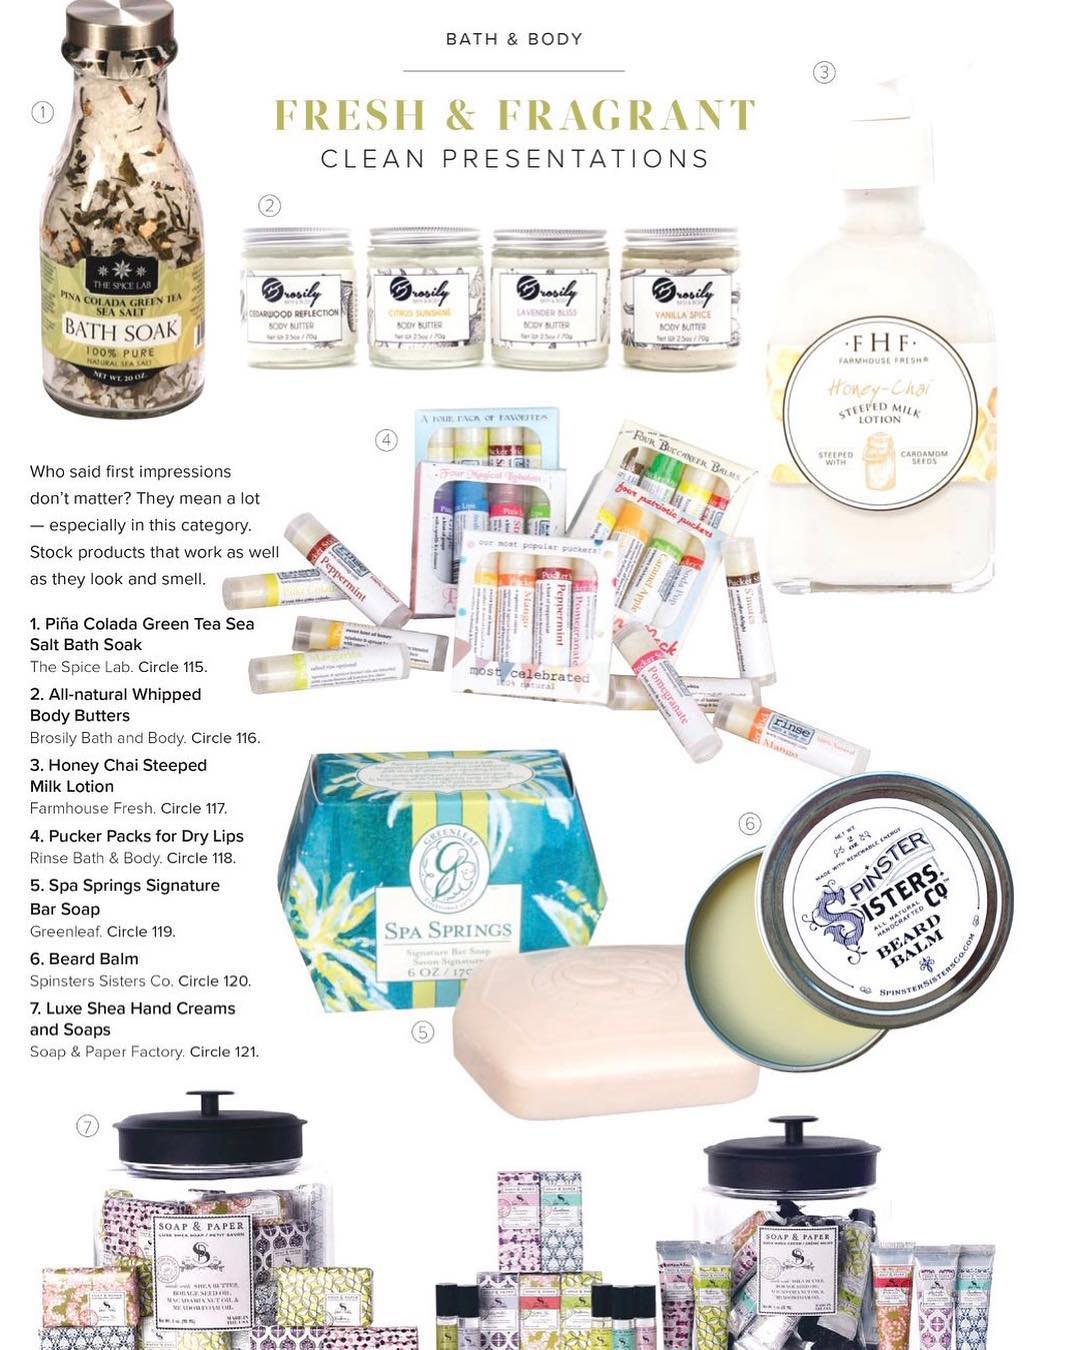 Bath & Body products make stocking stuffers. Check out our selection in the fall issue, link in bio